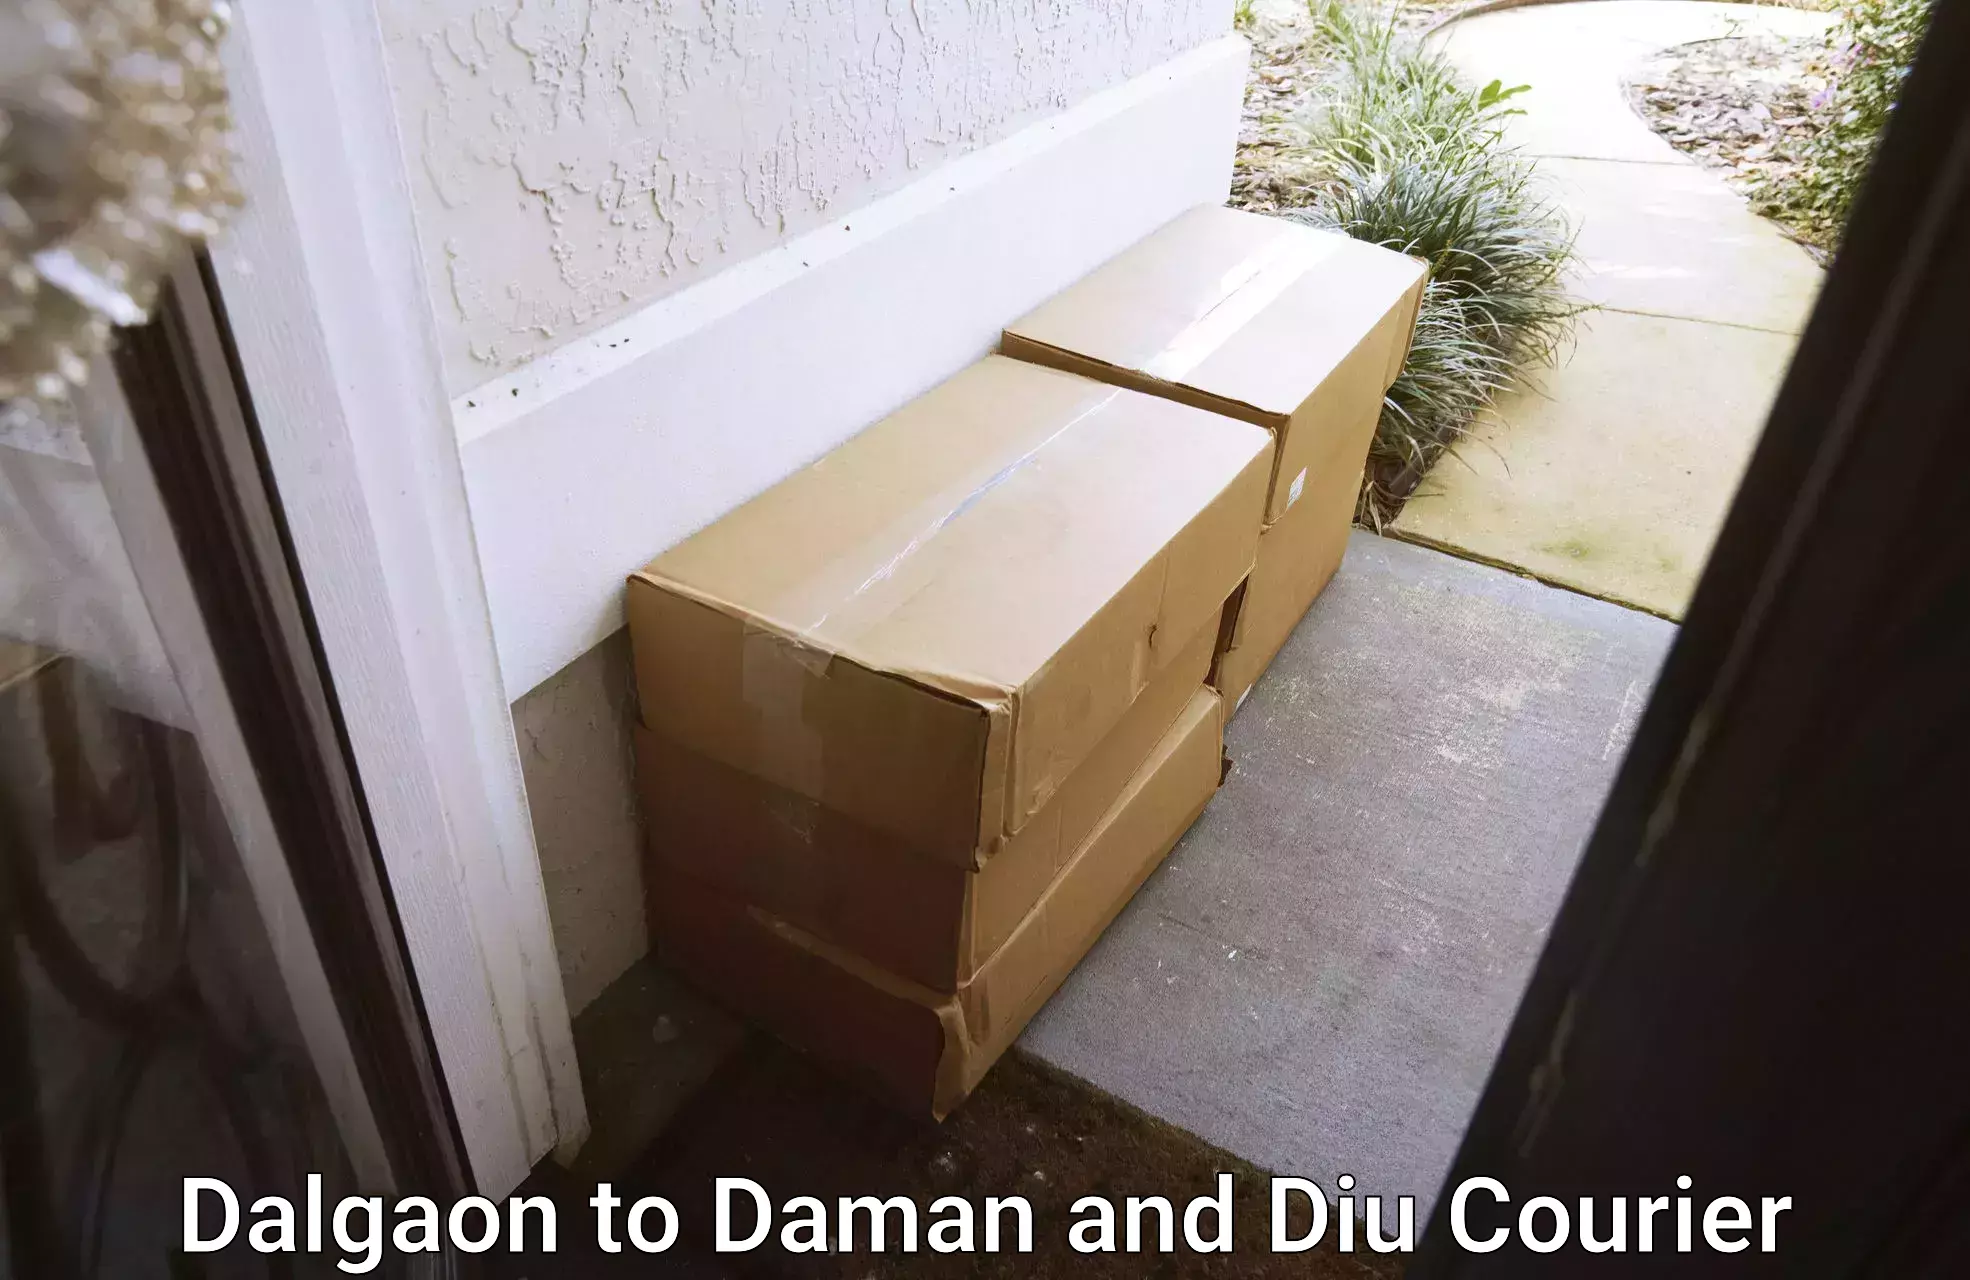 Courier rate comparison Dalgaon to Daman and Diu